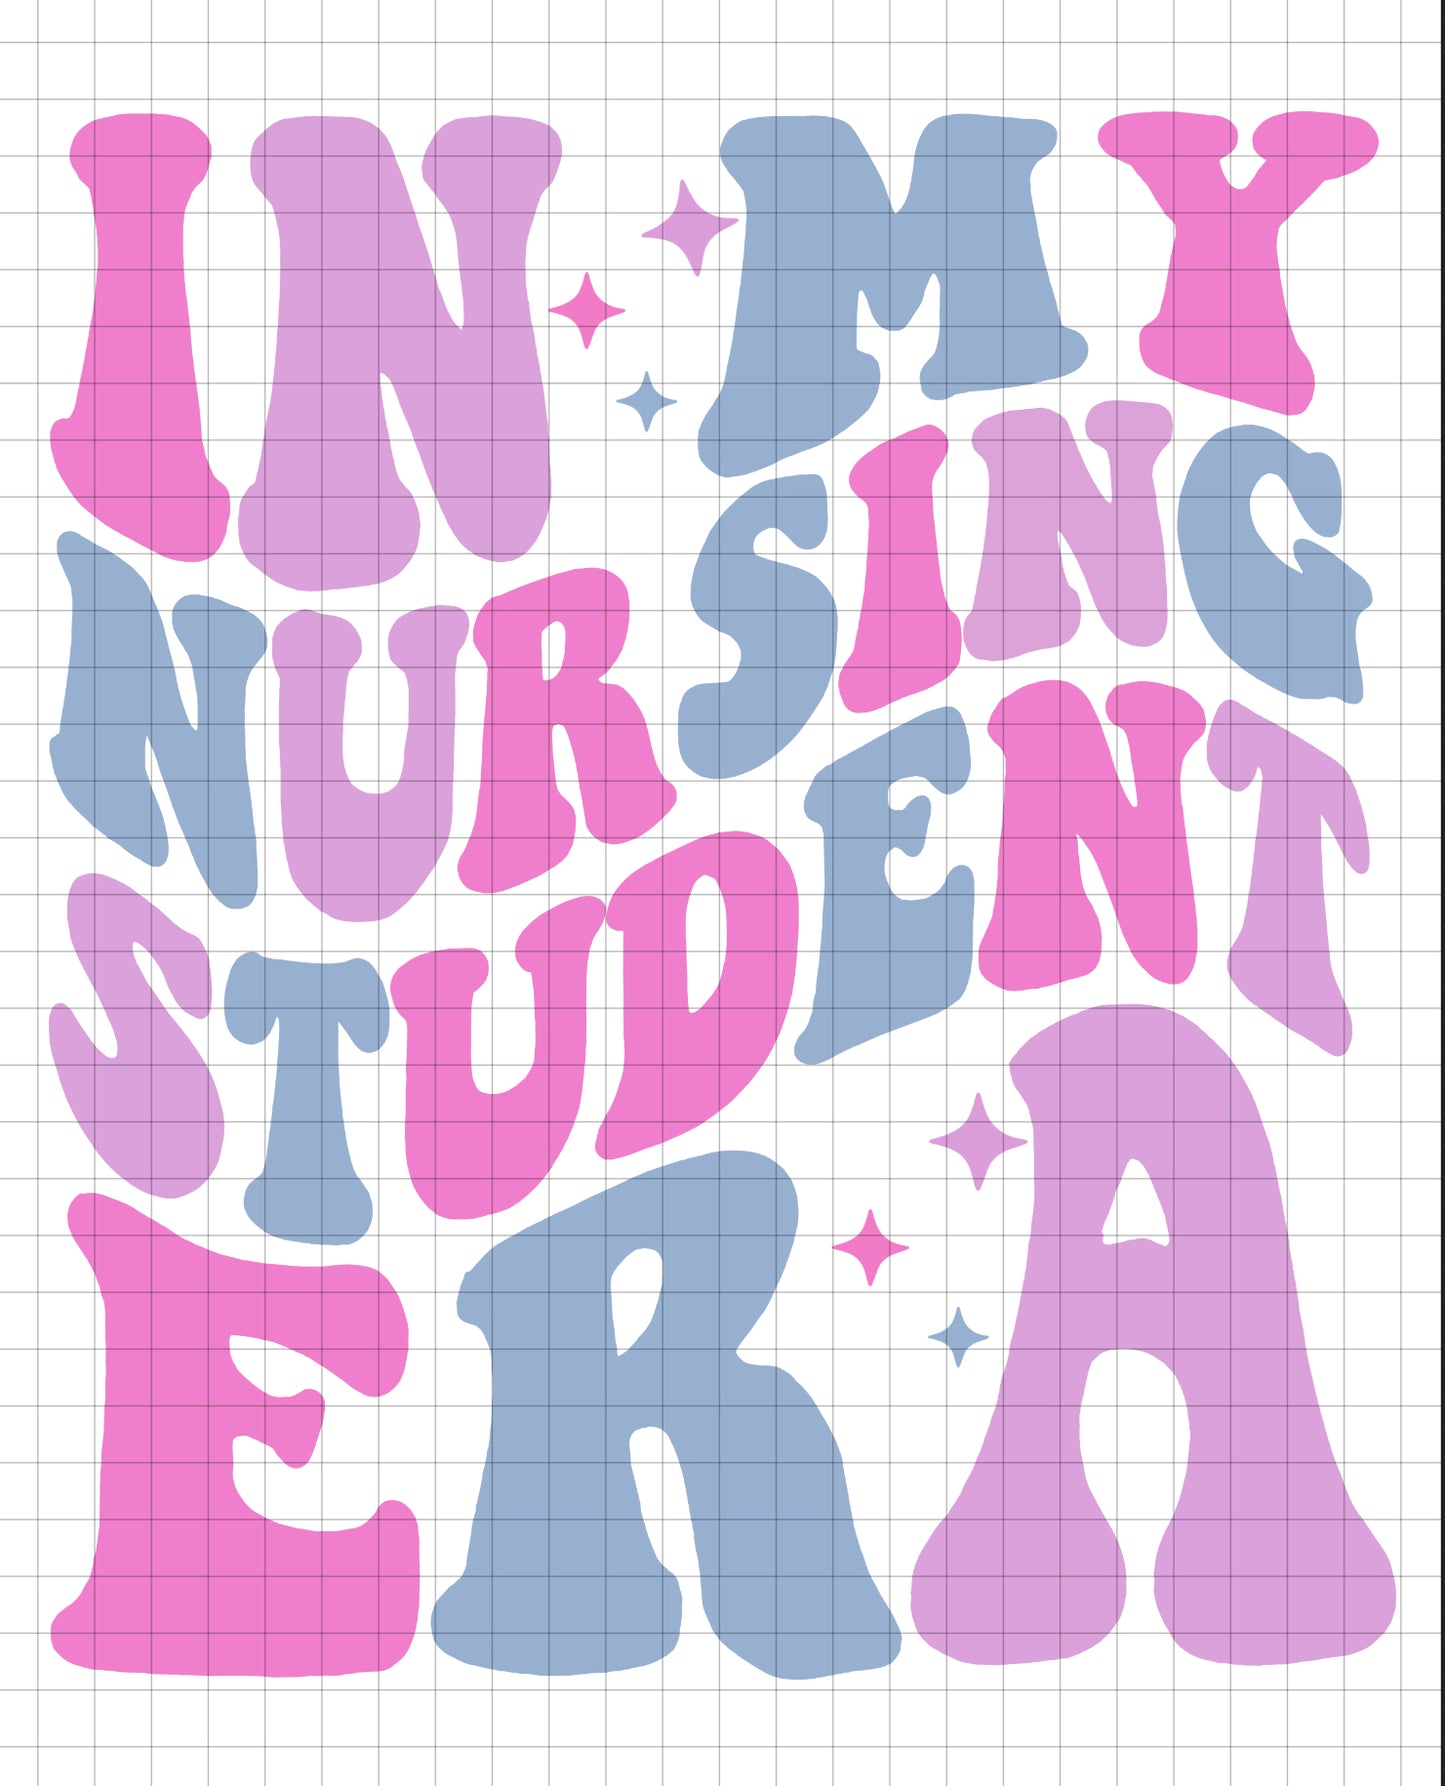 IN MY NURSING STUDENT ERA PINK AND PURPLE - transparent png file